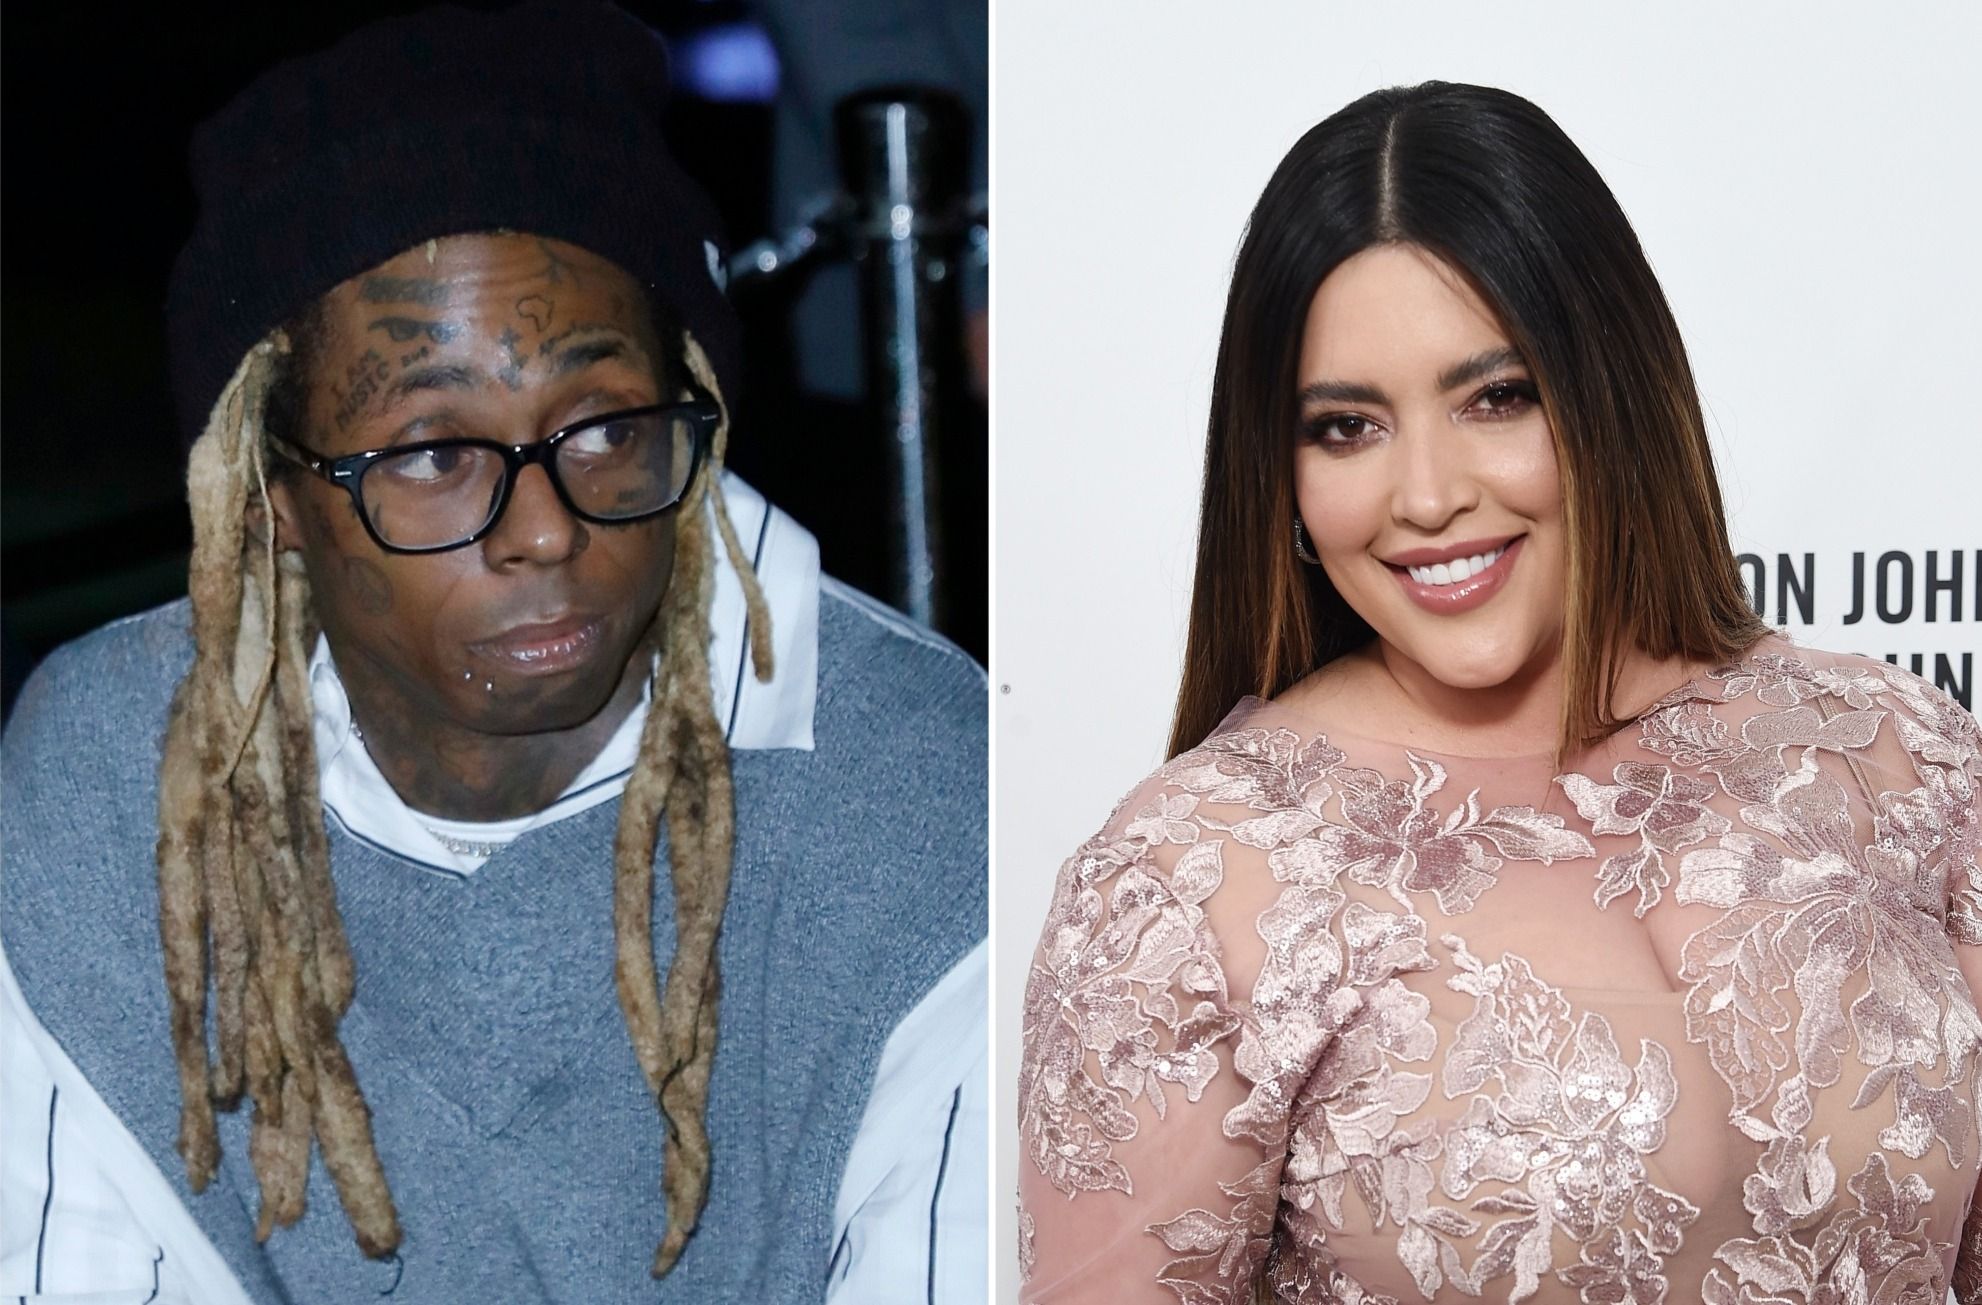 Lil Wayne And Denise Bidot Unfollow One Another On Social Media Sparking Breakup Speculations!